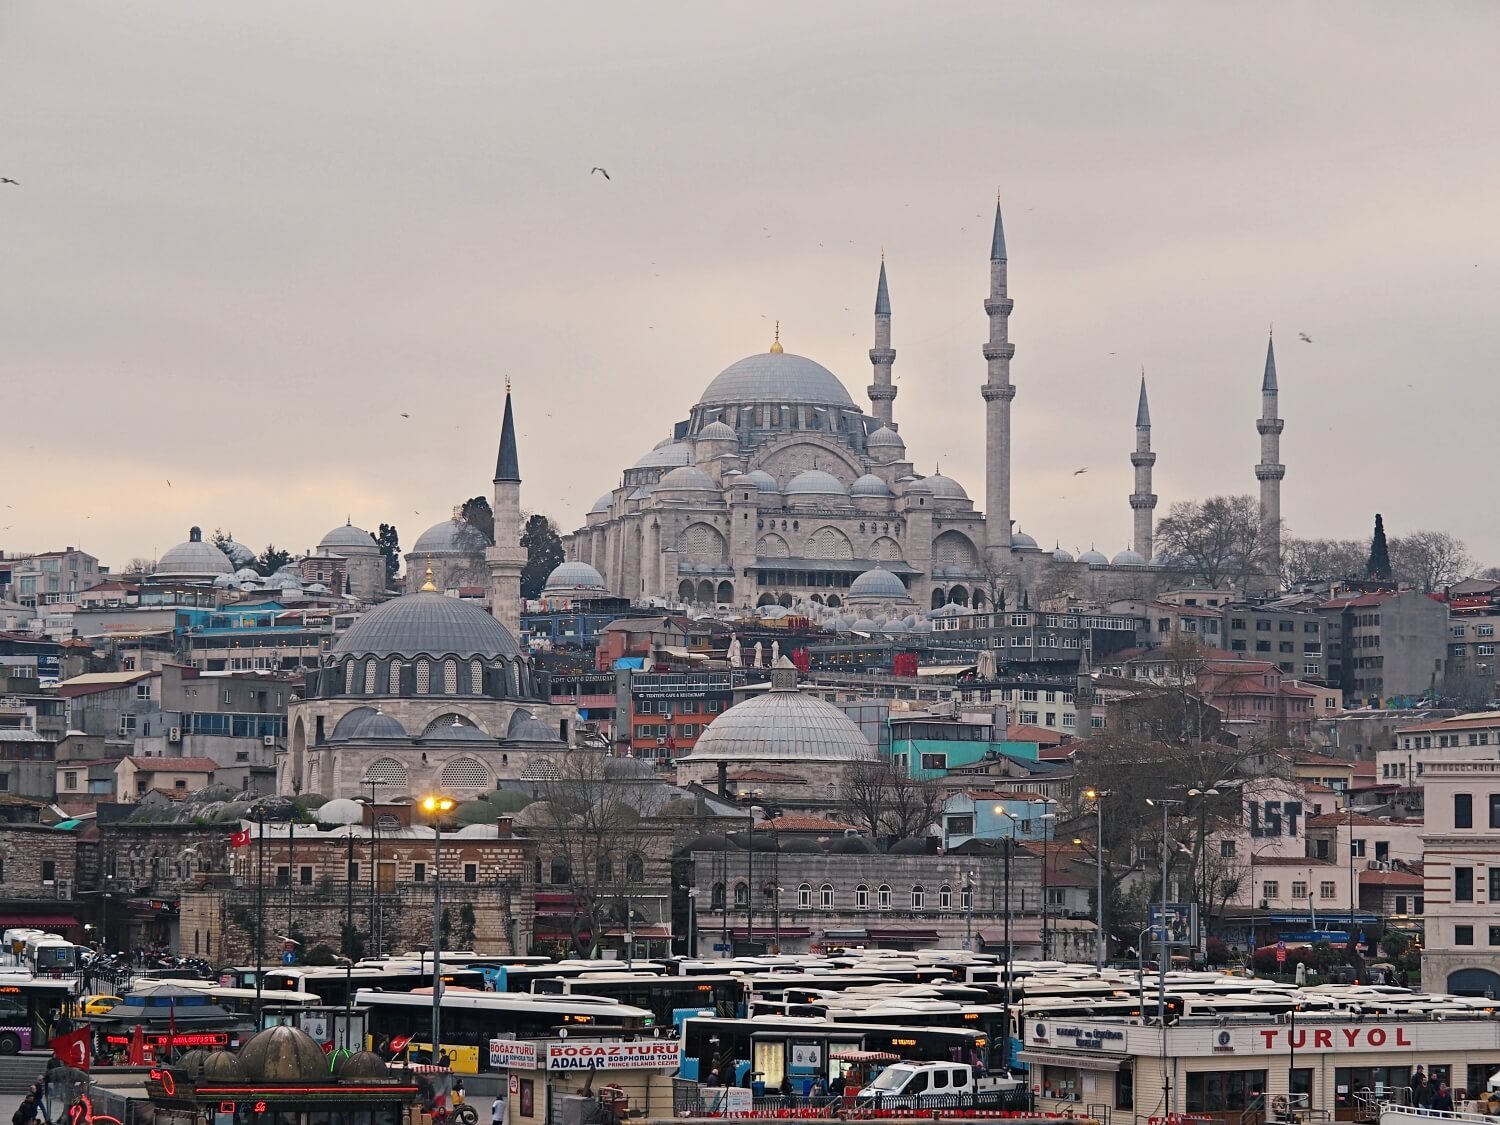 Istanbul in December weather - grey skies and a mosque on the hill in Istanbul